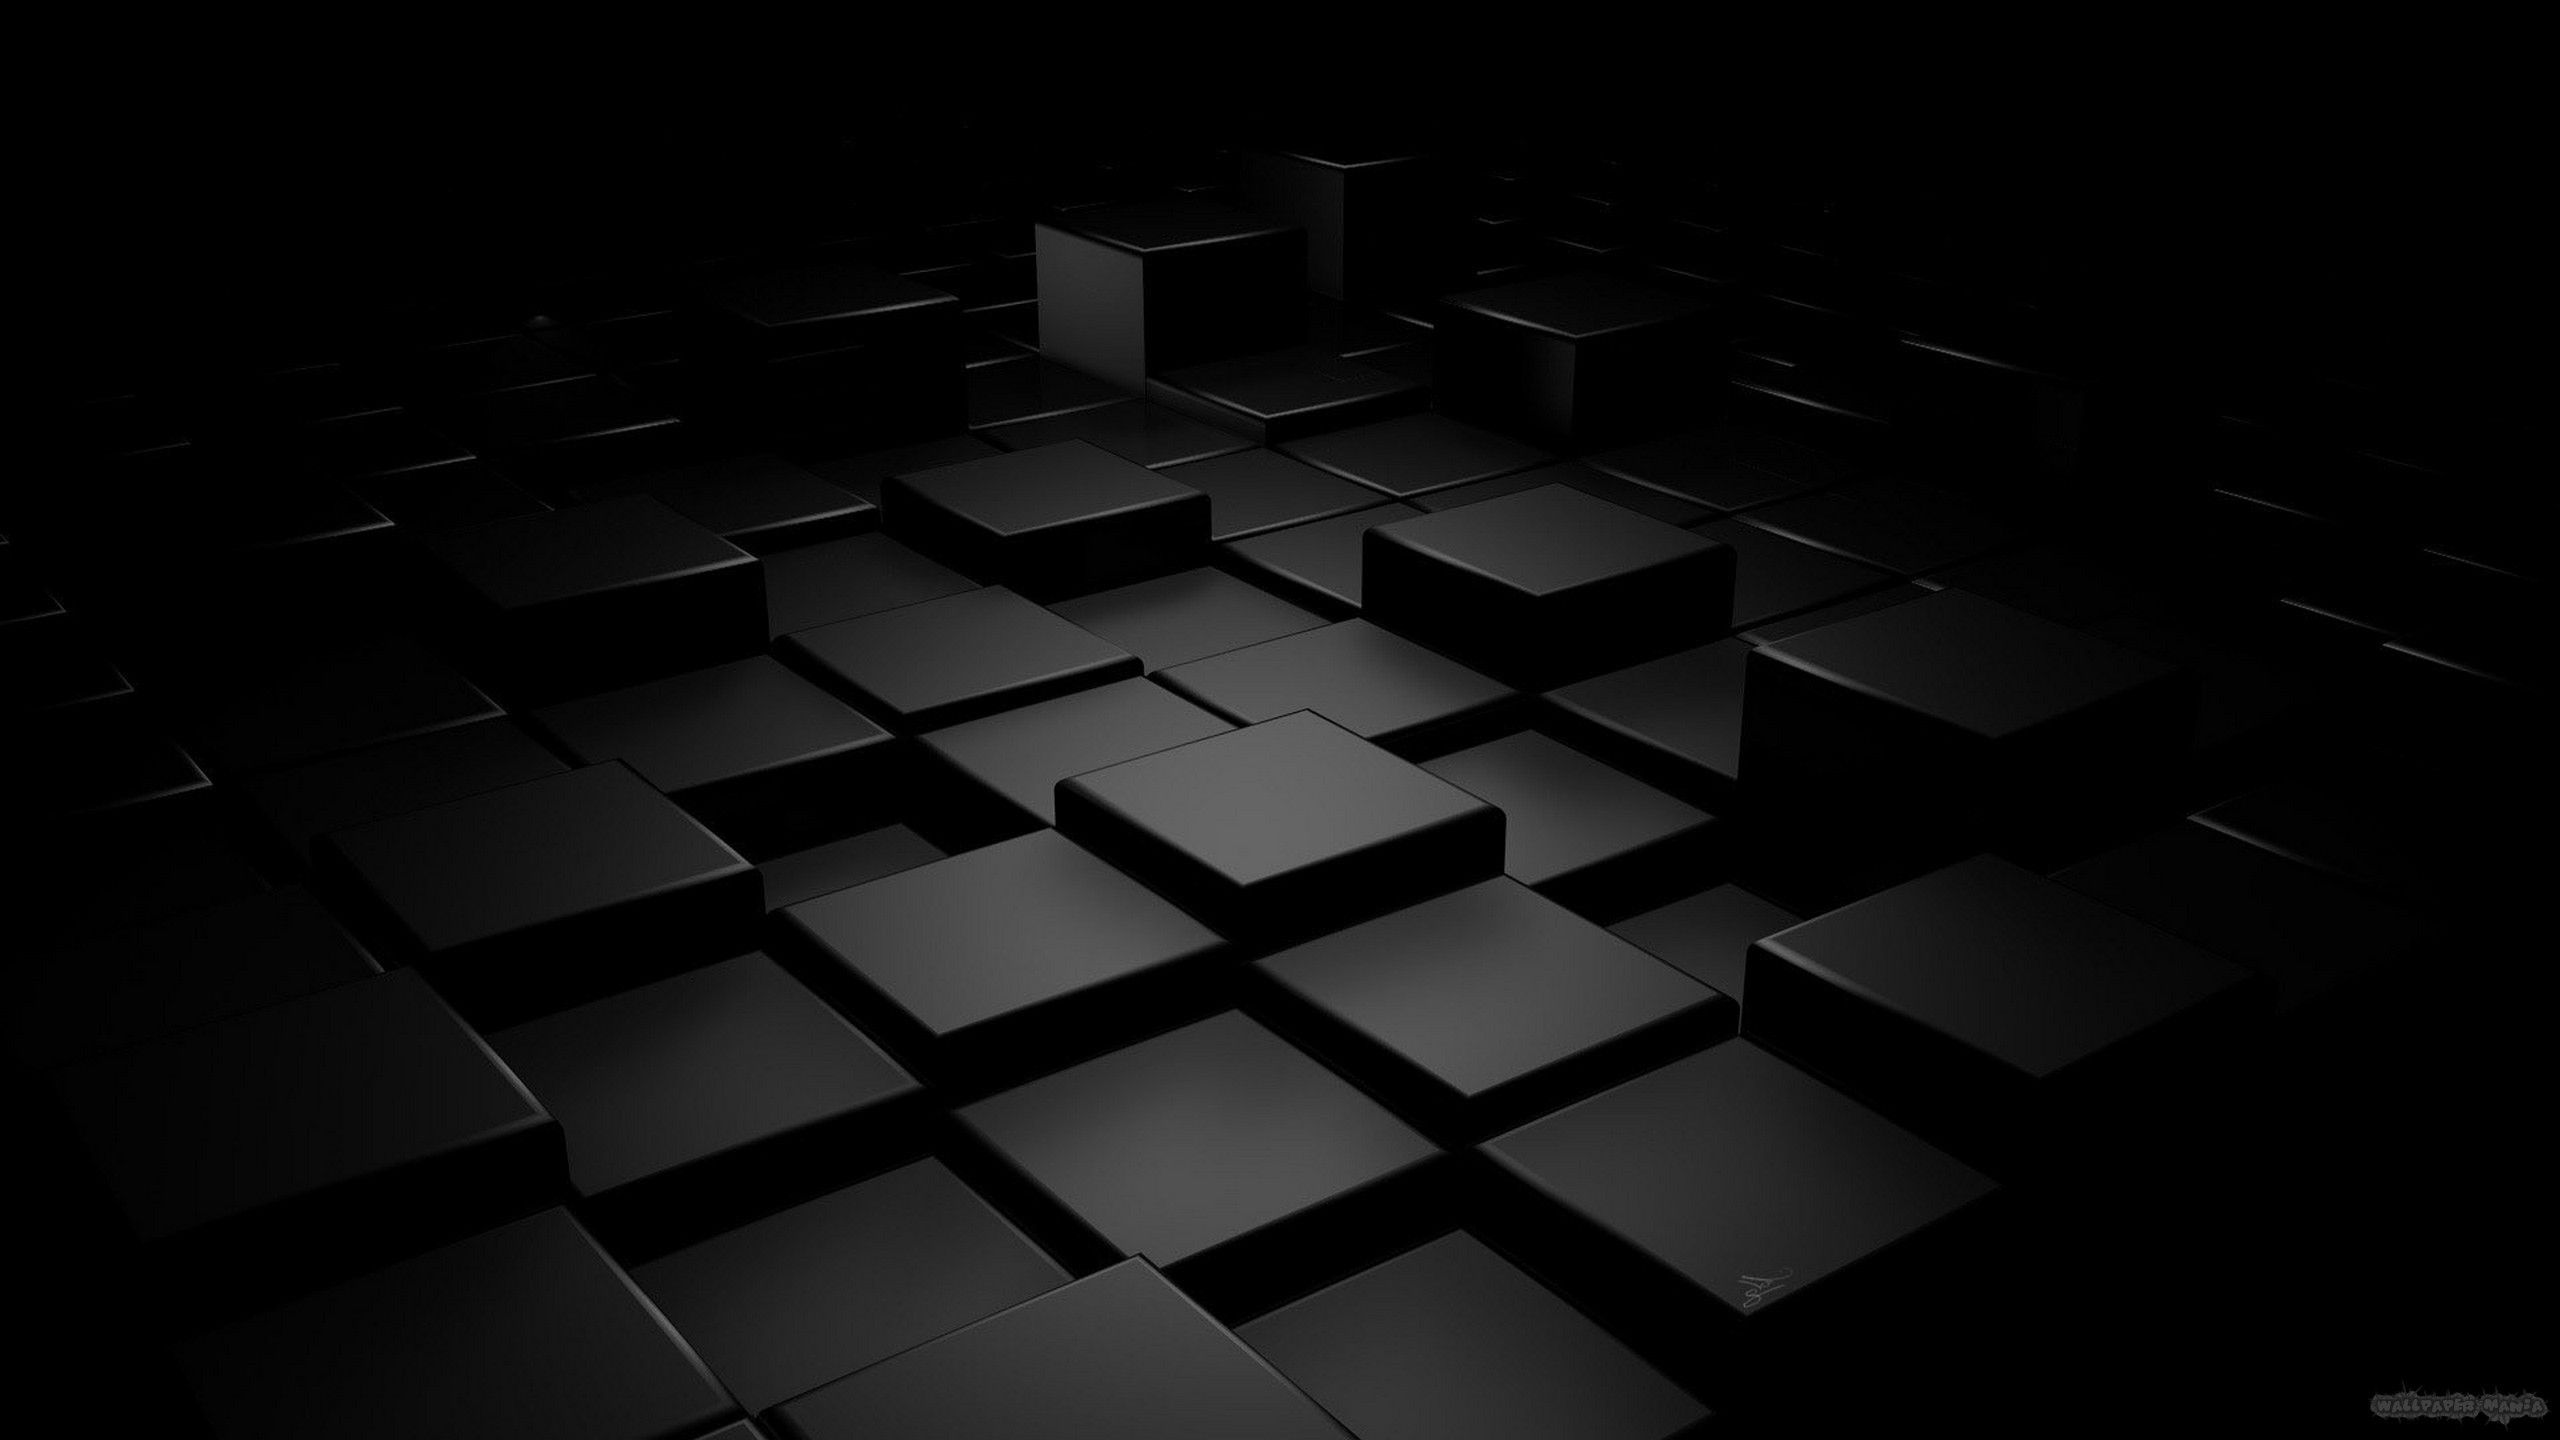 Black and White Abstract Wallpaper background picture